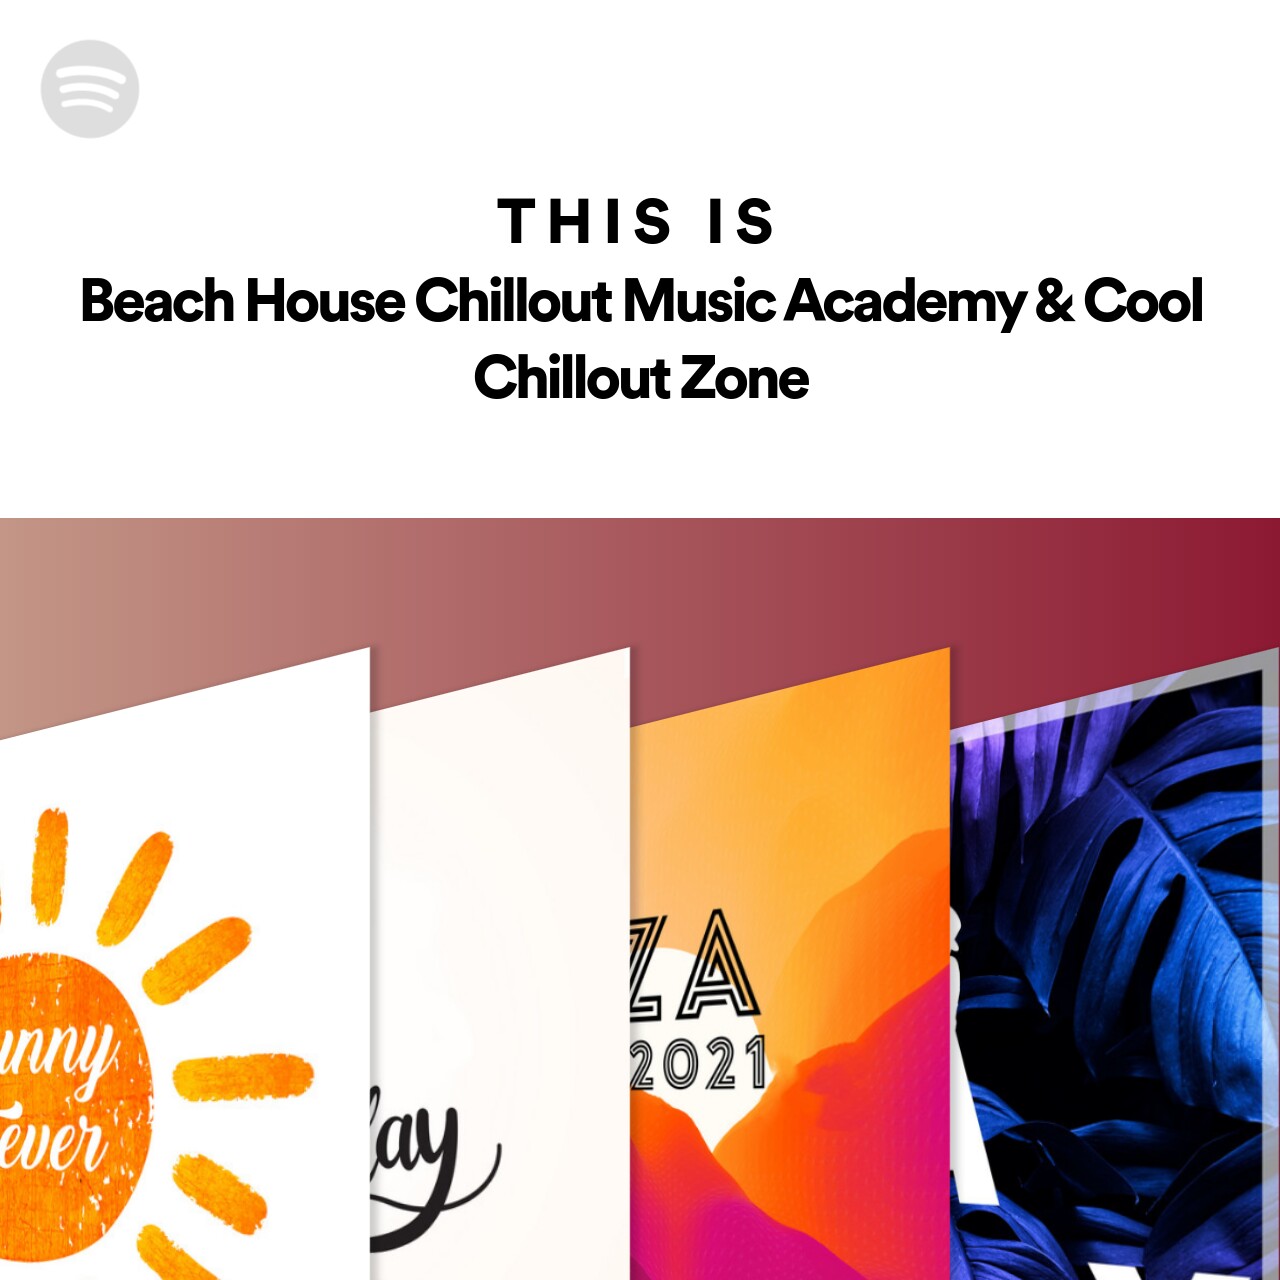 This Is Beach House Chillout Music Academy & Cool Chillout Zone